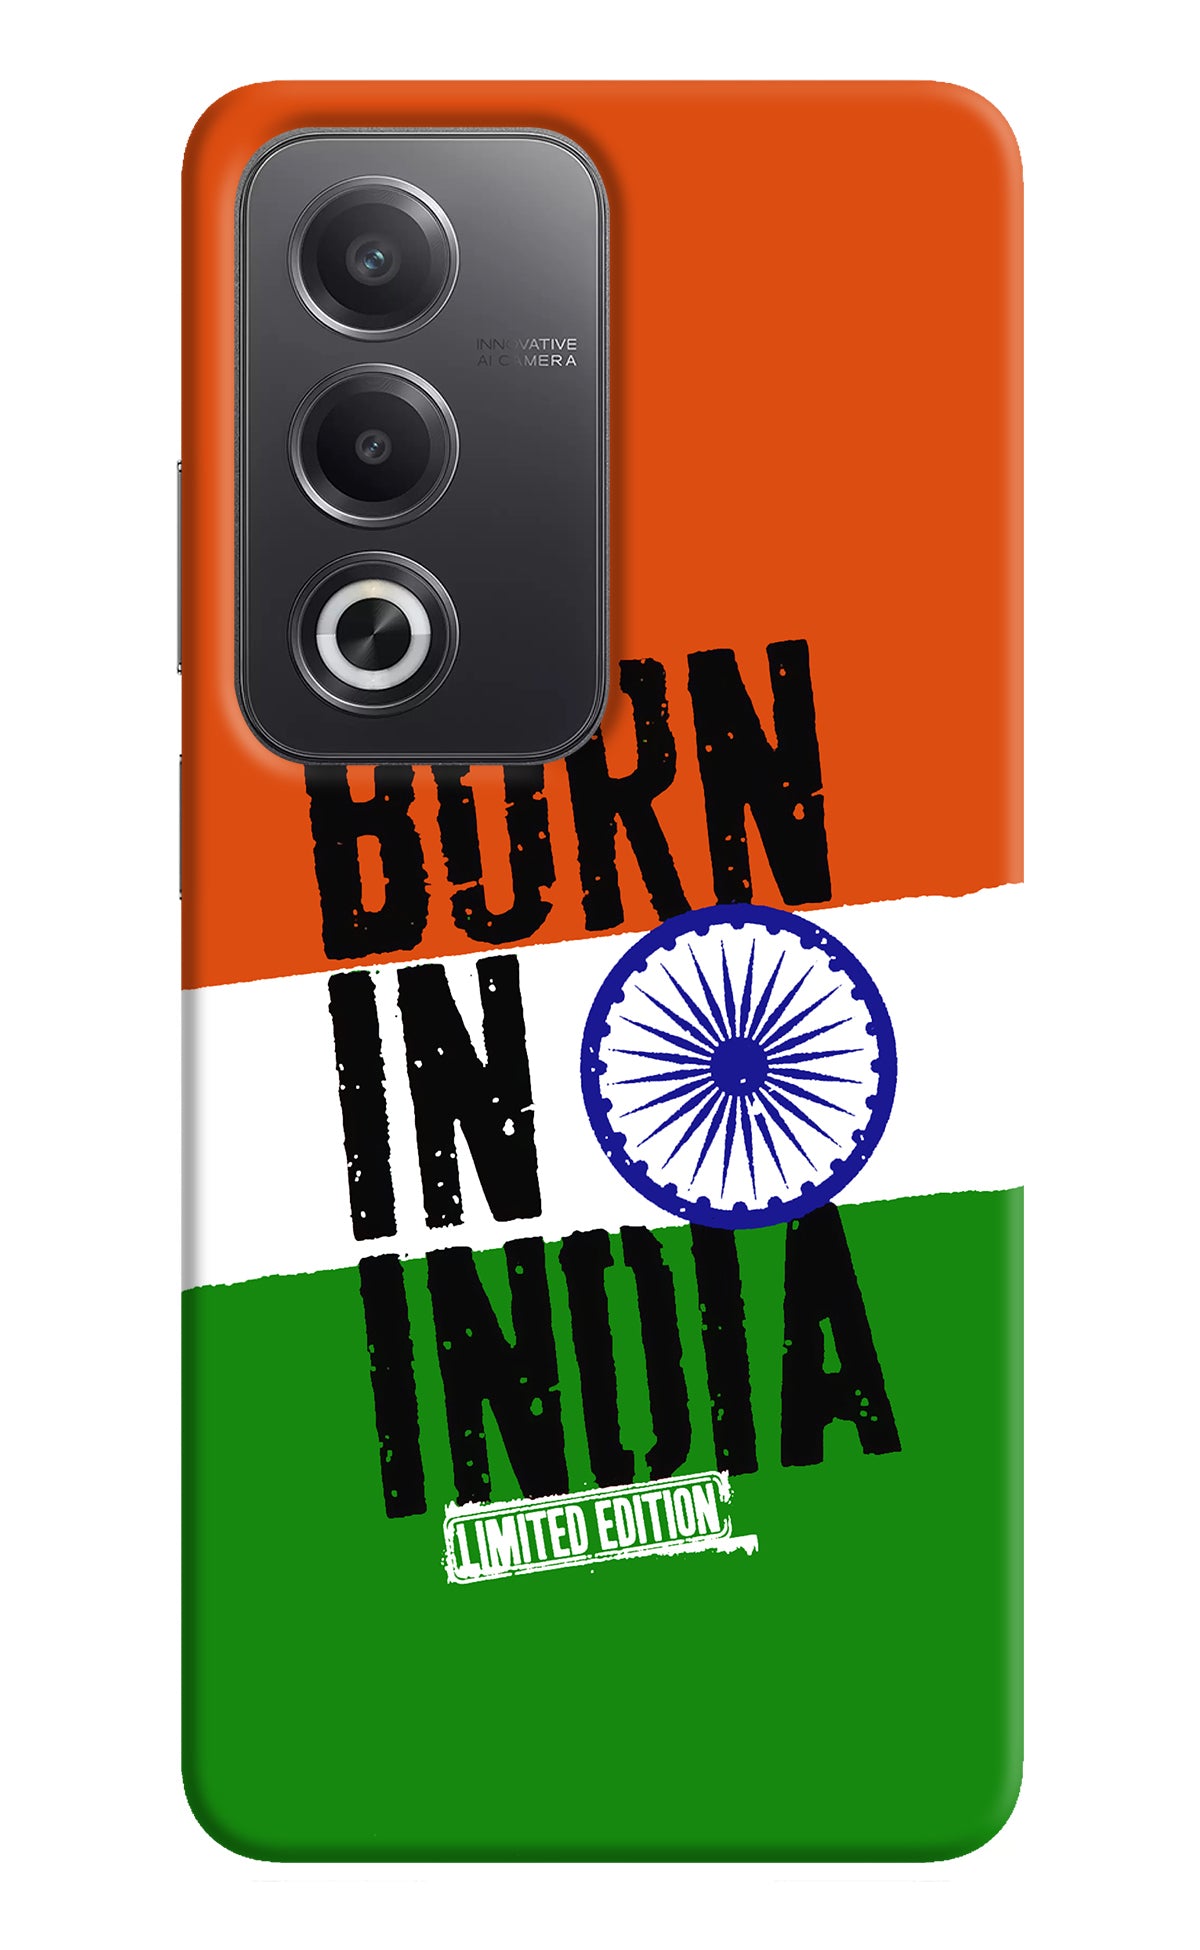 Born in India Oppo A3 Pro 5G Back Cover